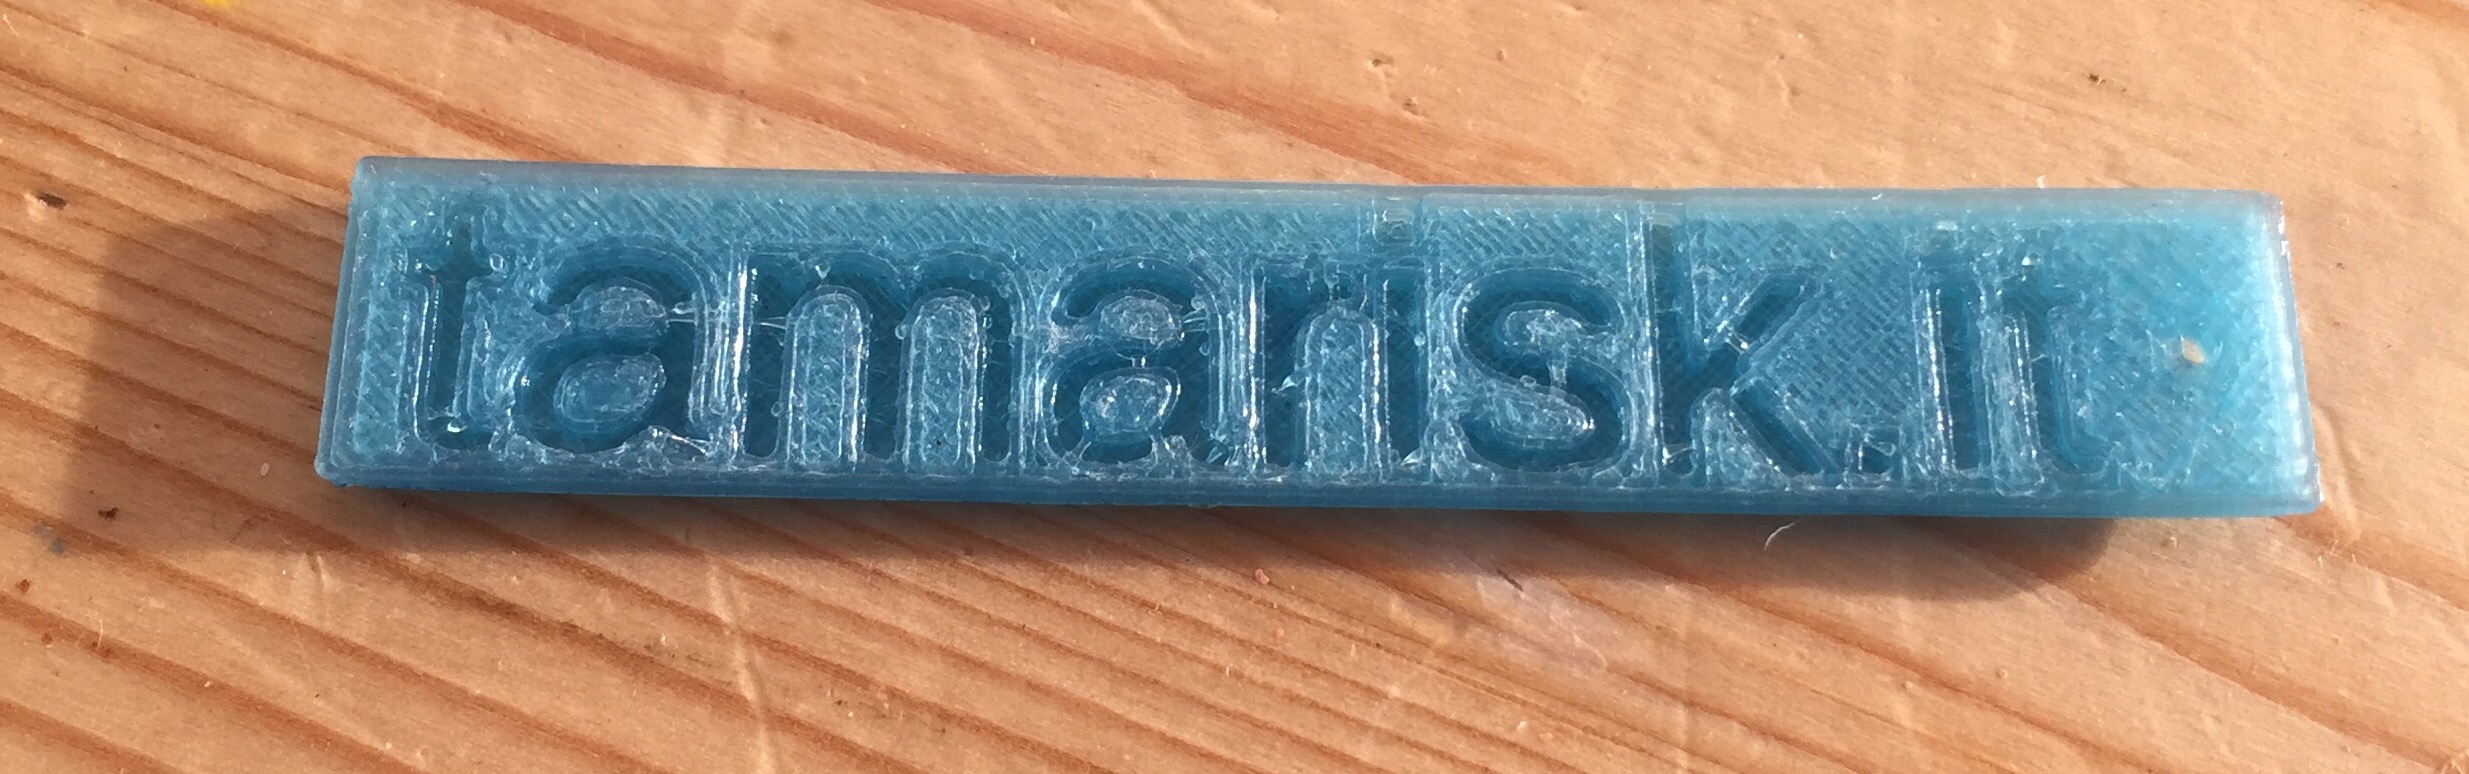 print with the extruded "tamarisk.it" embossed into it